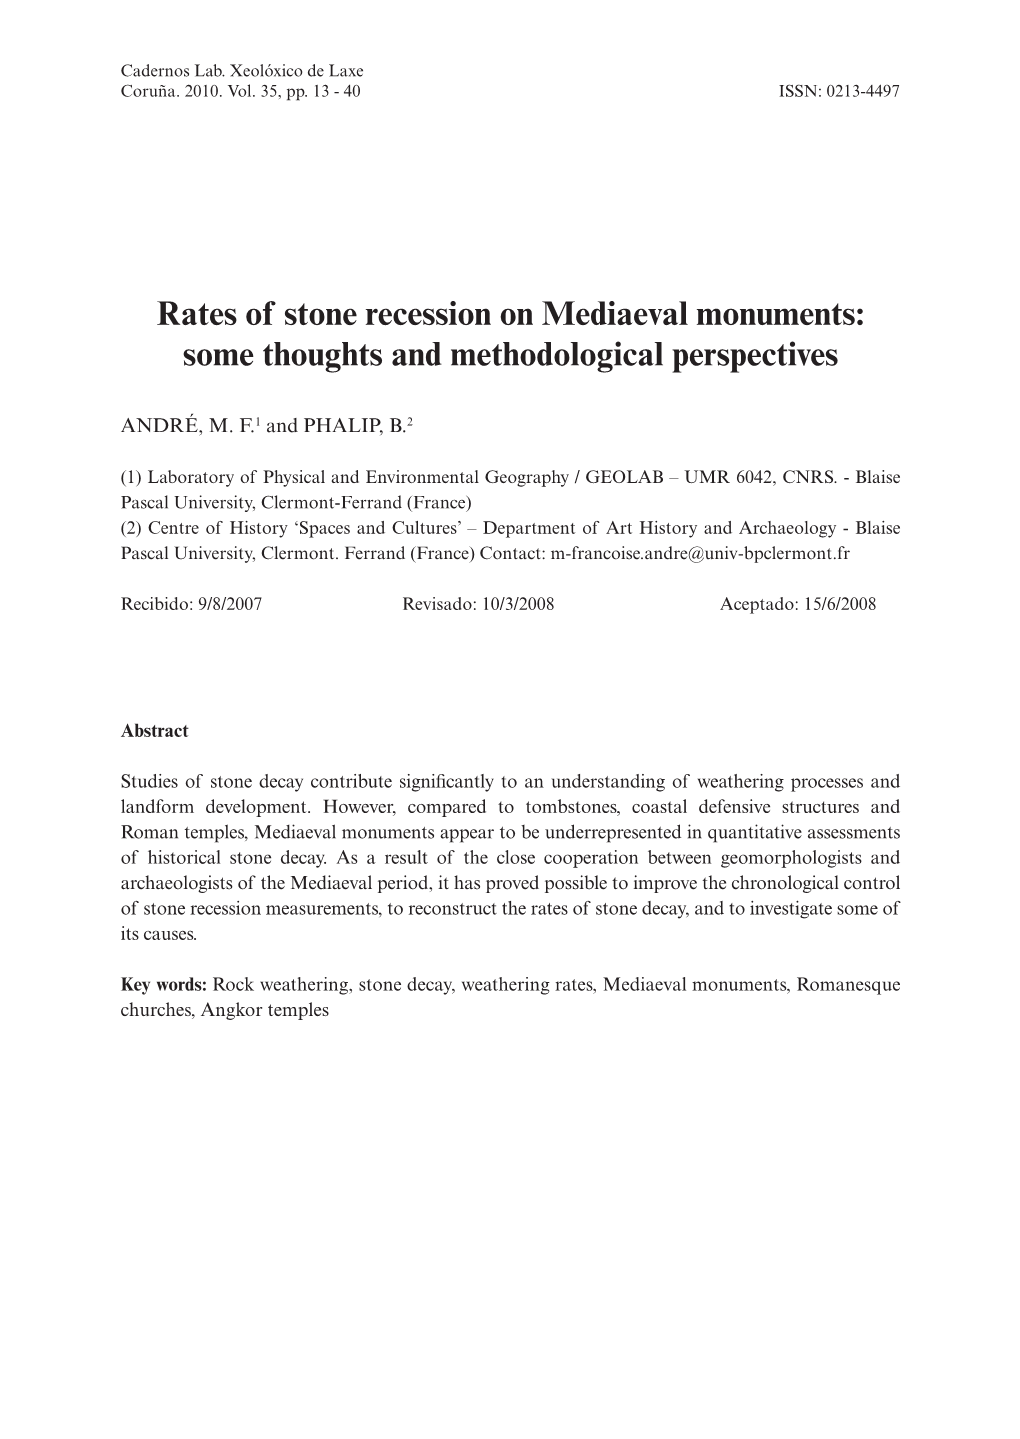 Rates of Stone Recession on Mediaeval Monuments: Some Thoughts and Methodological Perspectives